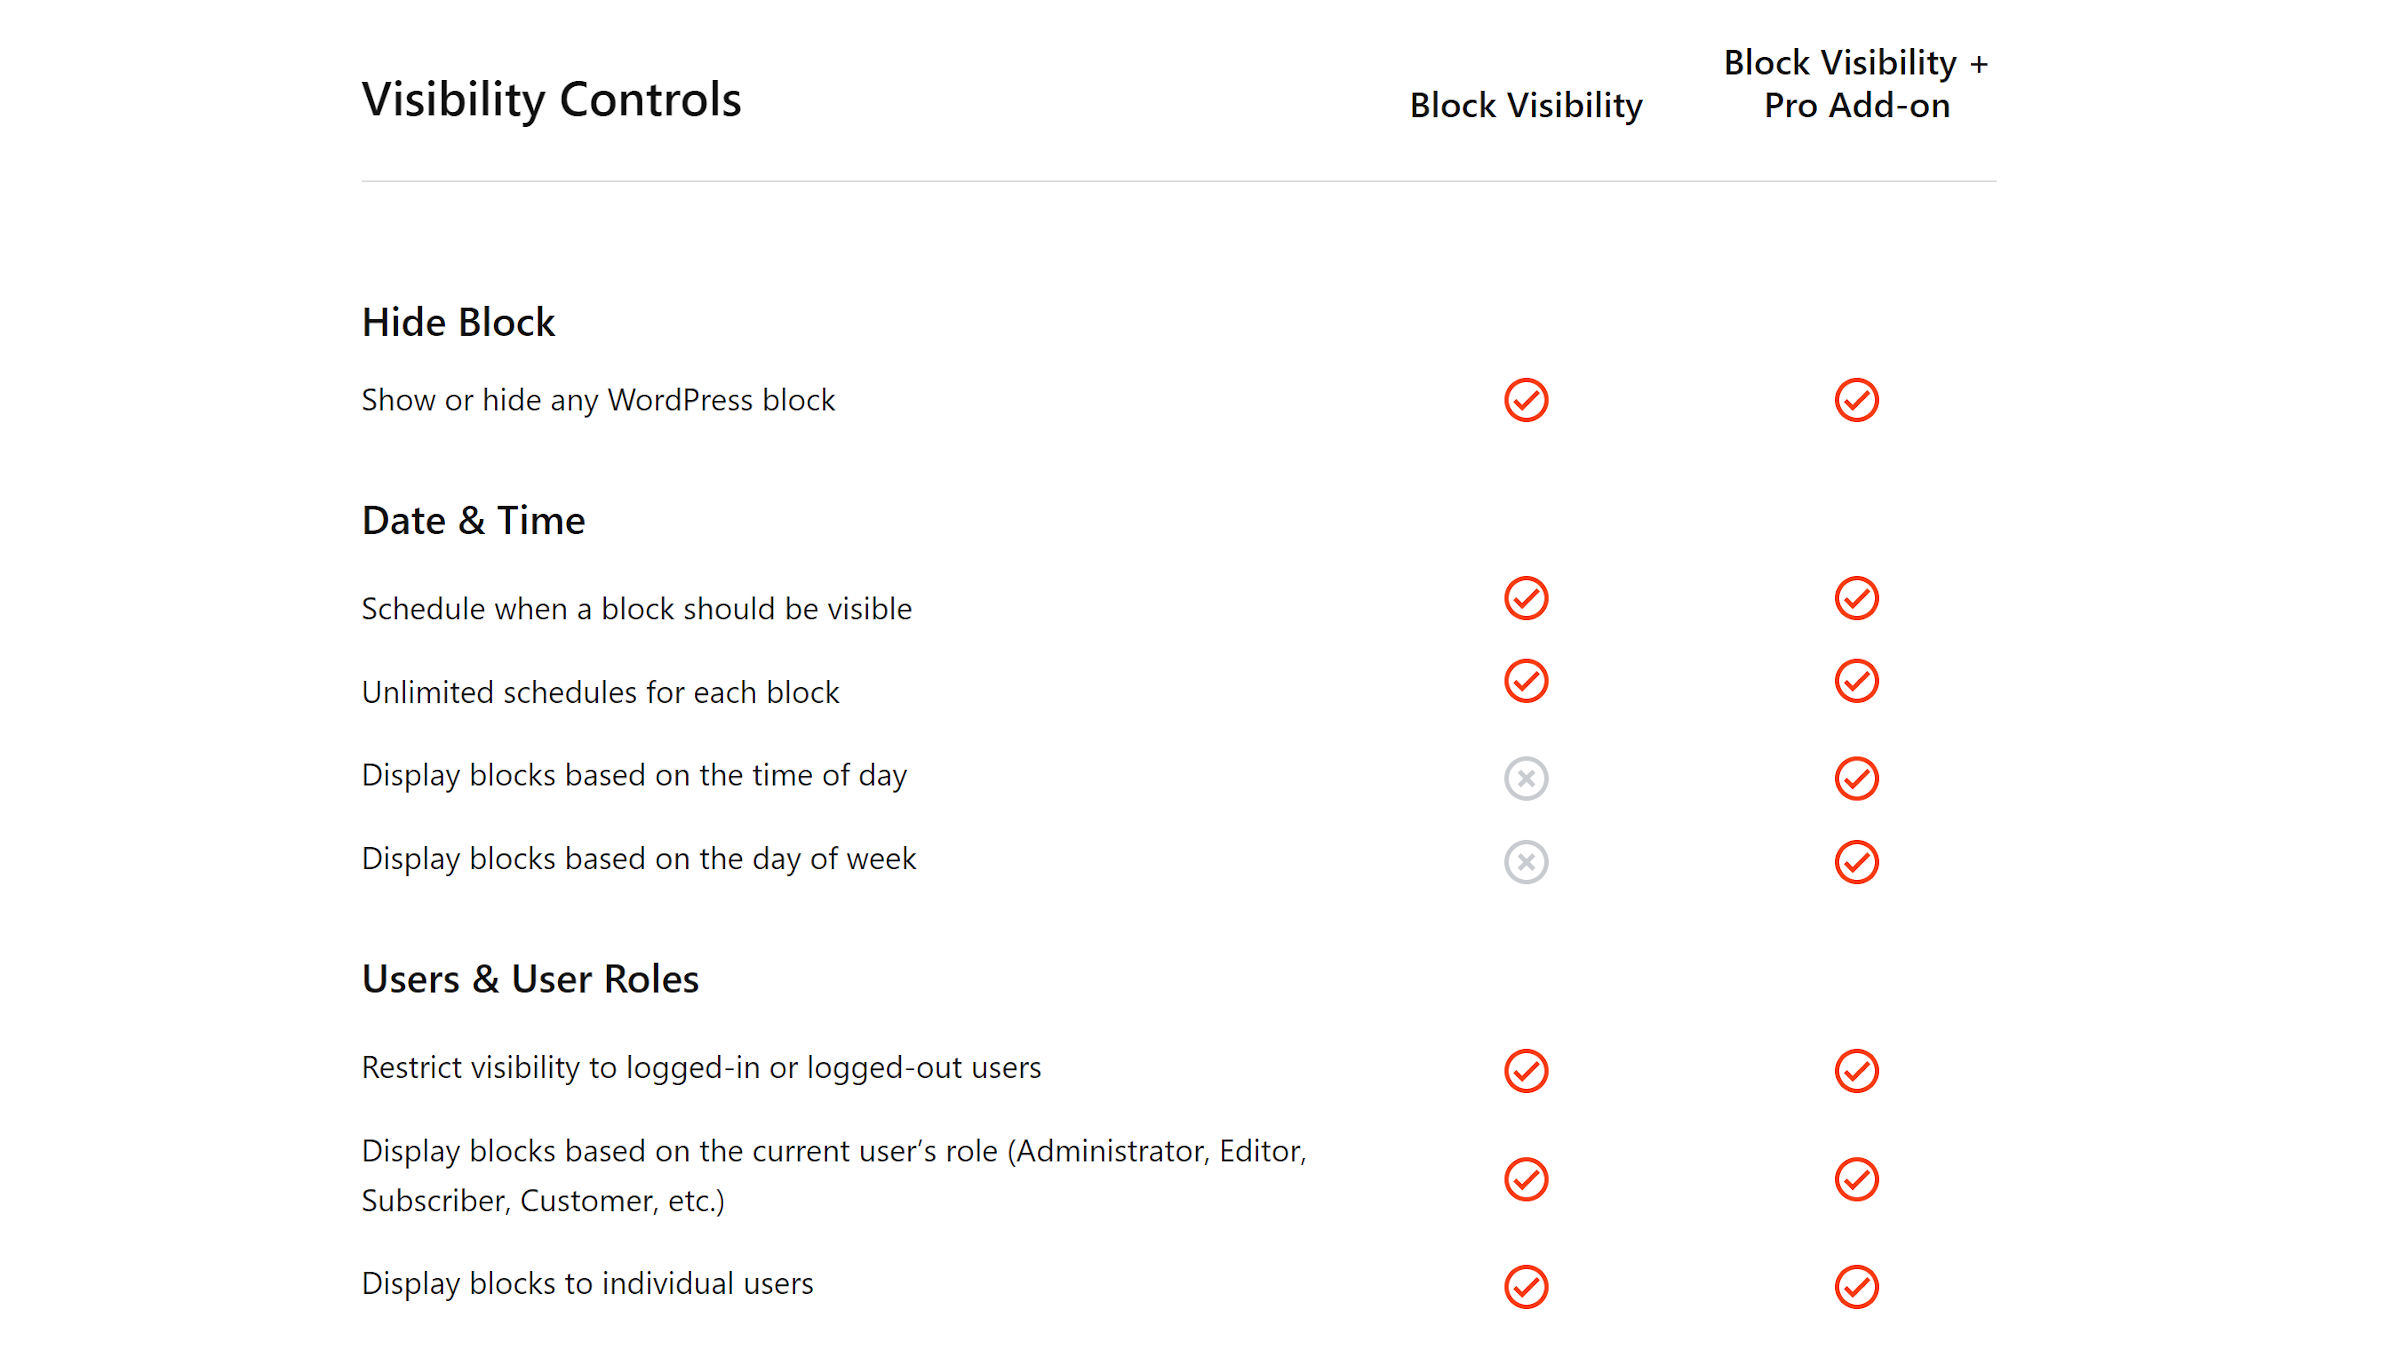 Screenshot of the pricing table from the Block Visibility's pricing page.  On the left is a list of features. On the right, are checkmarks and "x" icons.